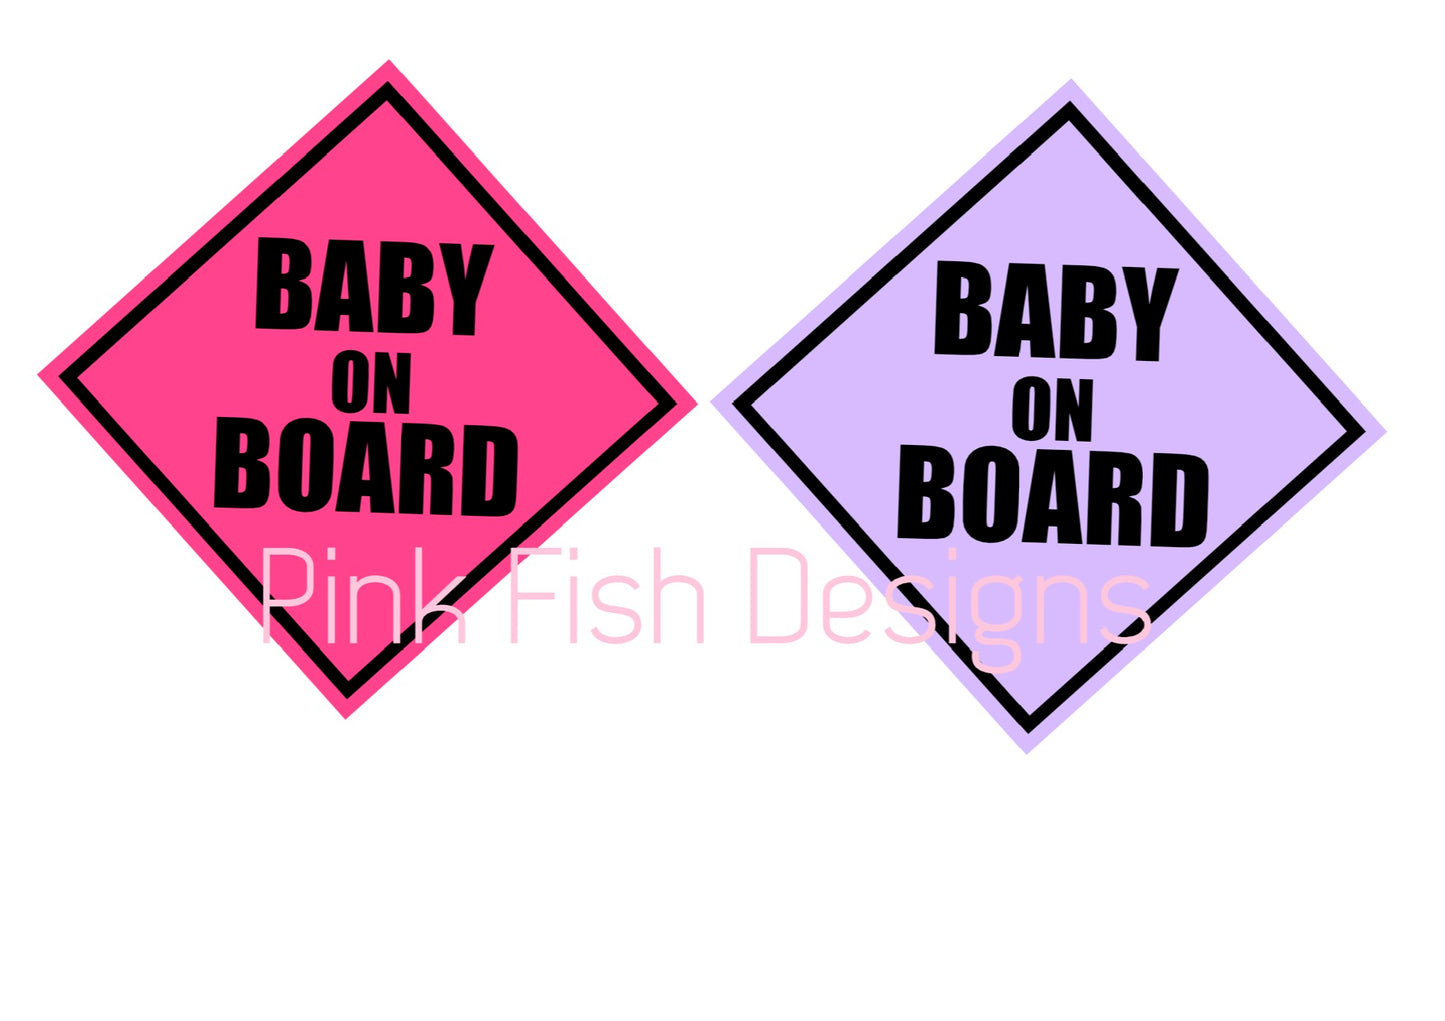 BABY ON BOARD COLOUR SIGN